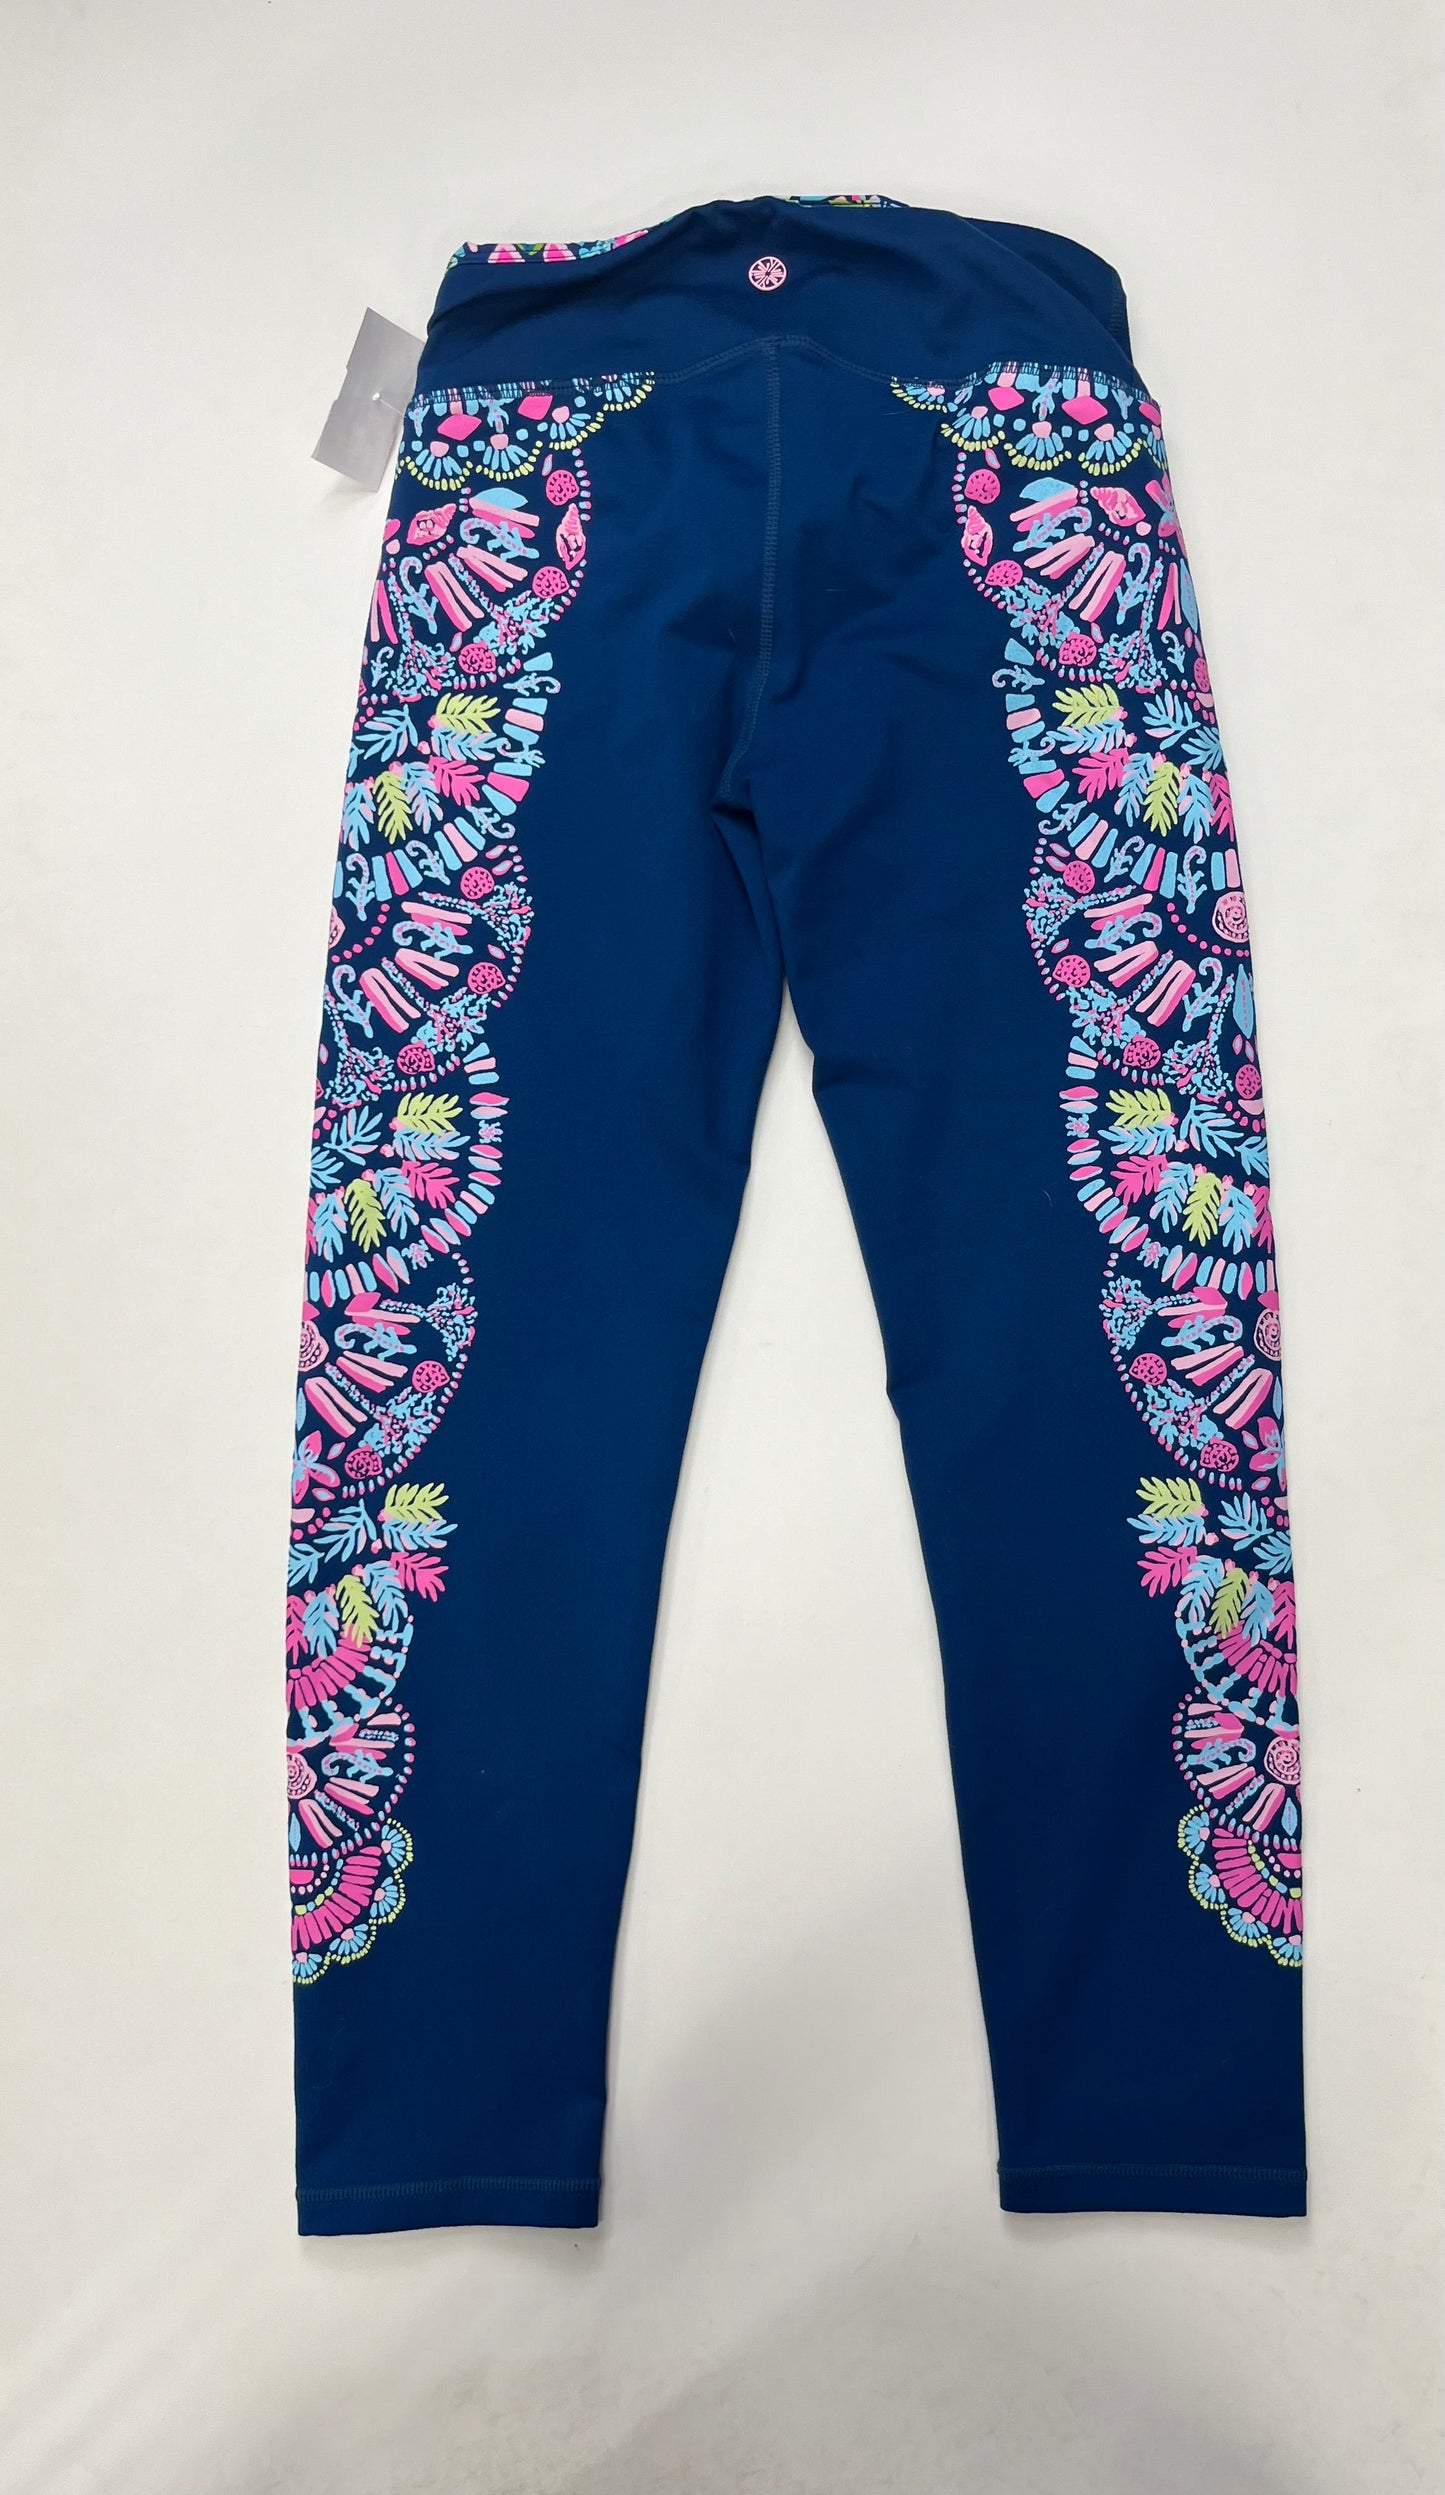 Multi Athletic Leggings Lilly Pulitzer, Size Xs